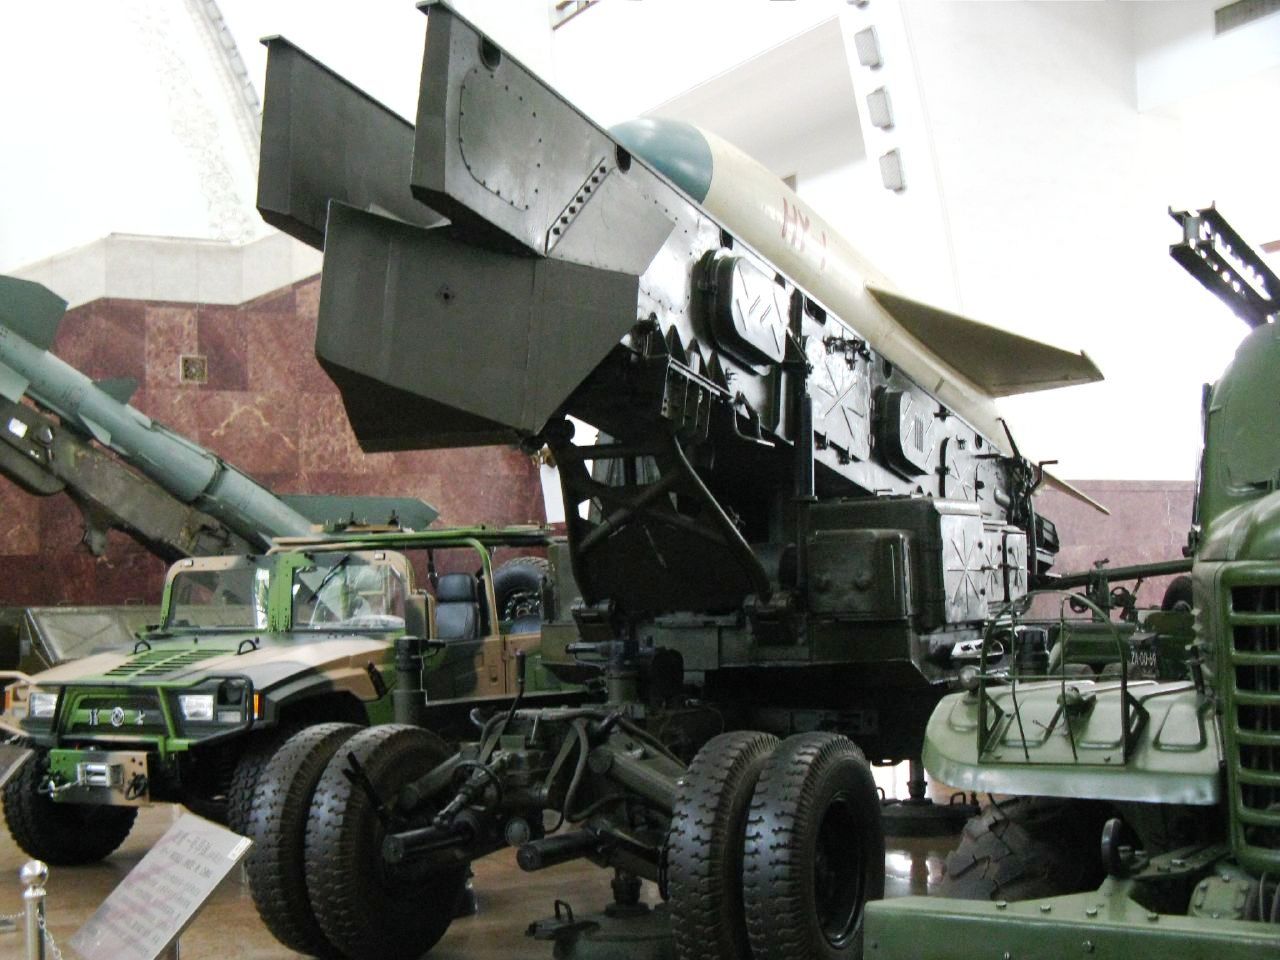 HY-1 launch vehicle in the Beijing military museum.